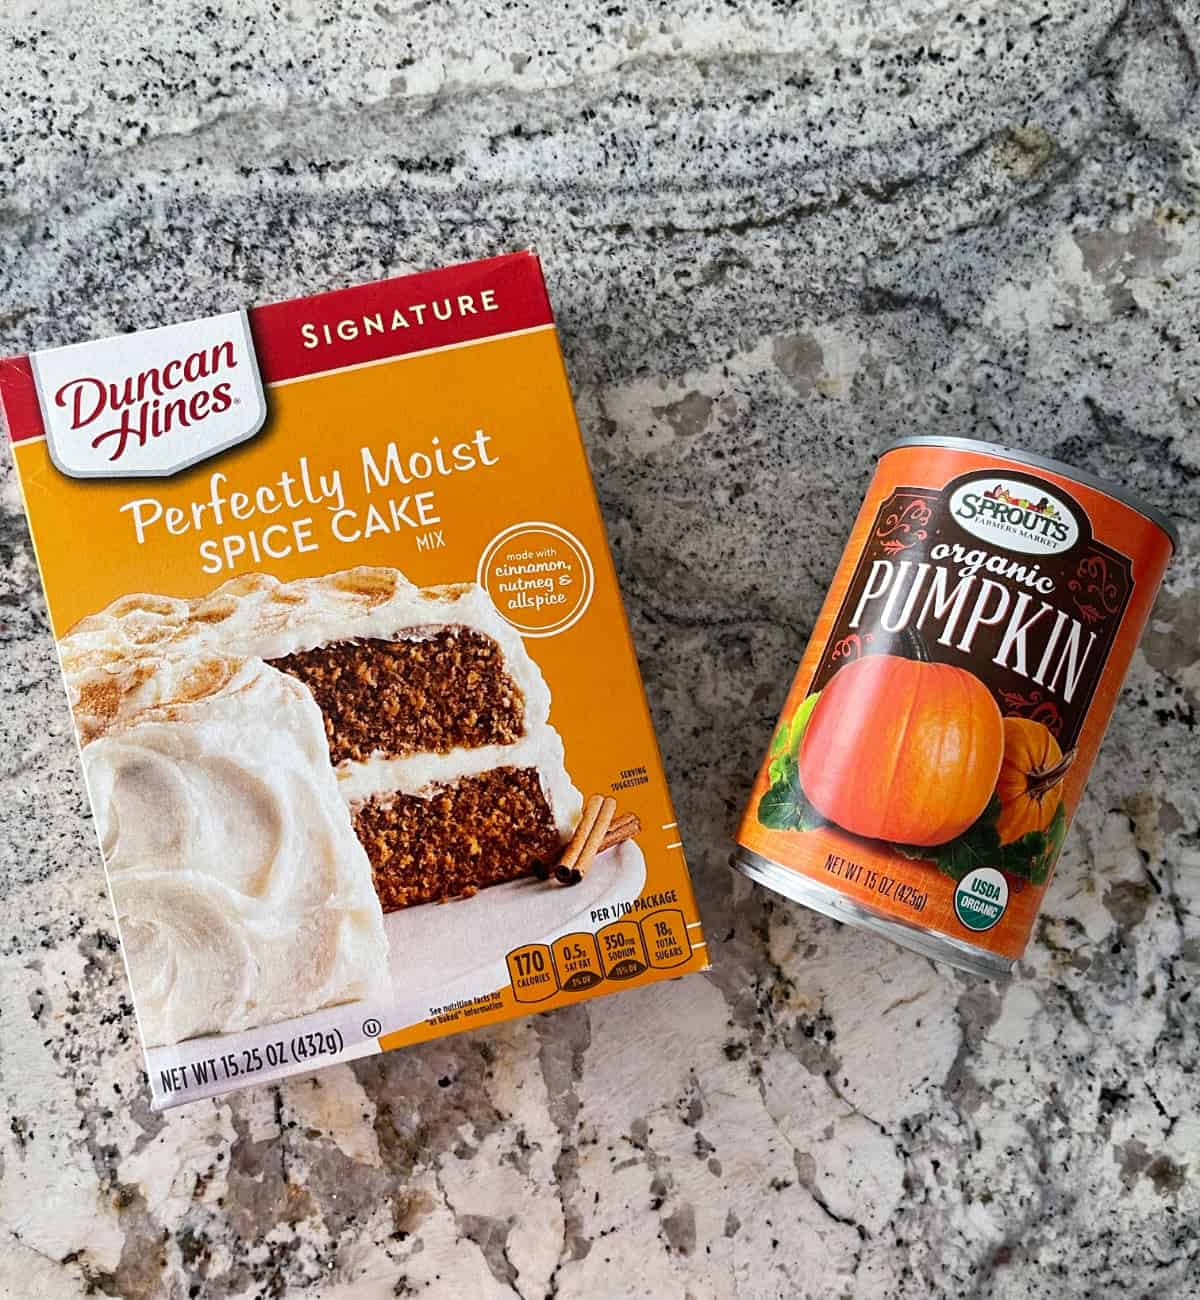 Ingredients including box of Duncan Hines spice cake mix and can of organic pumpkin puree on granite.